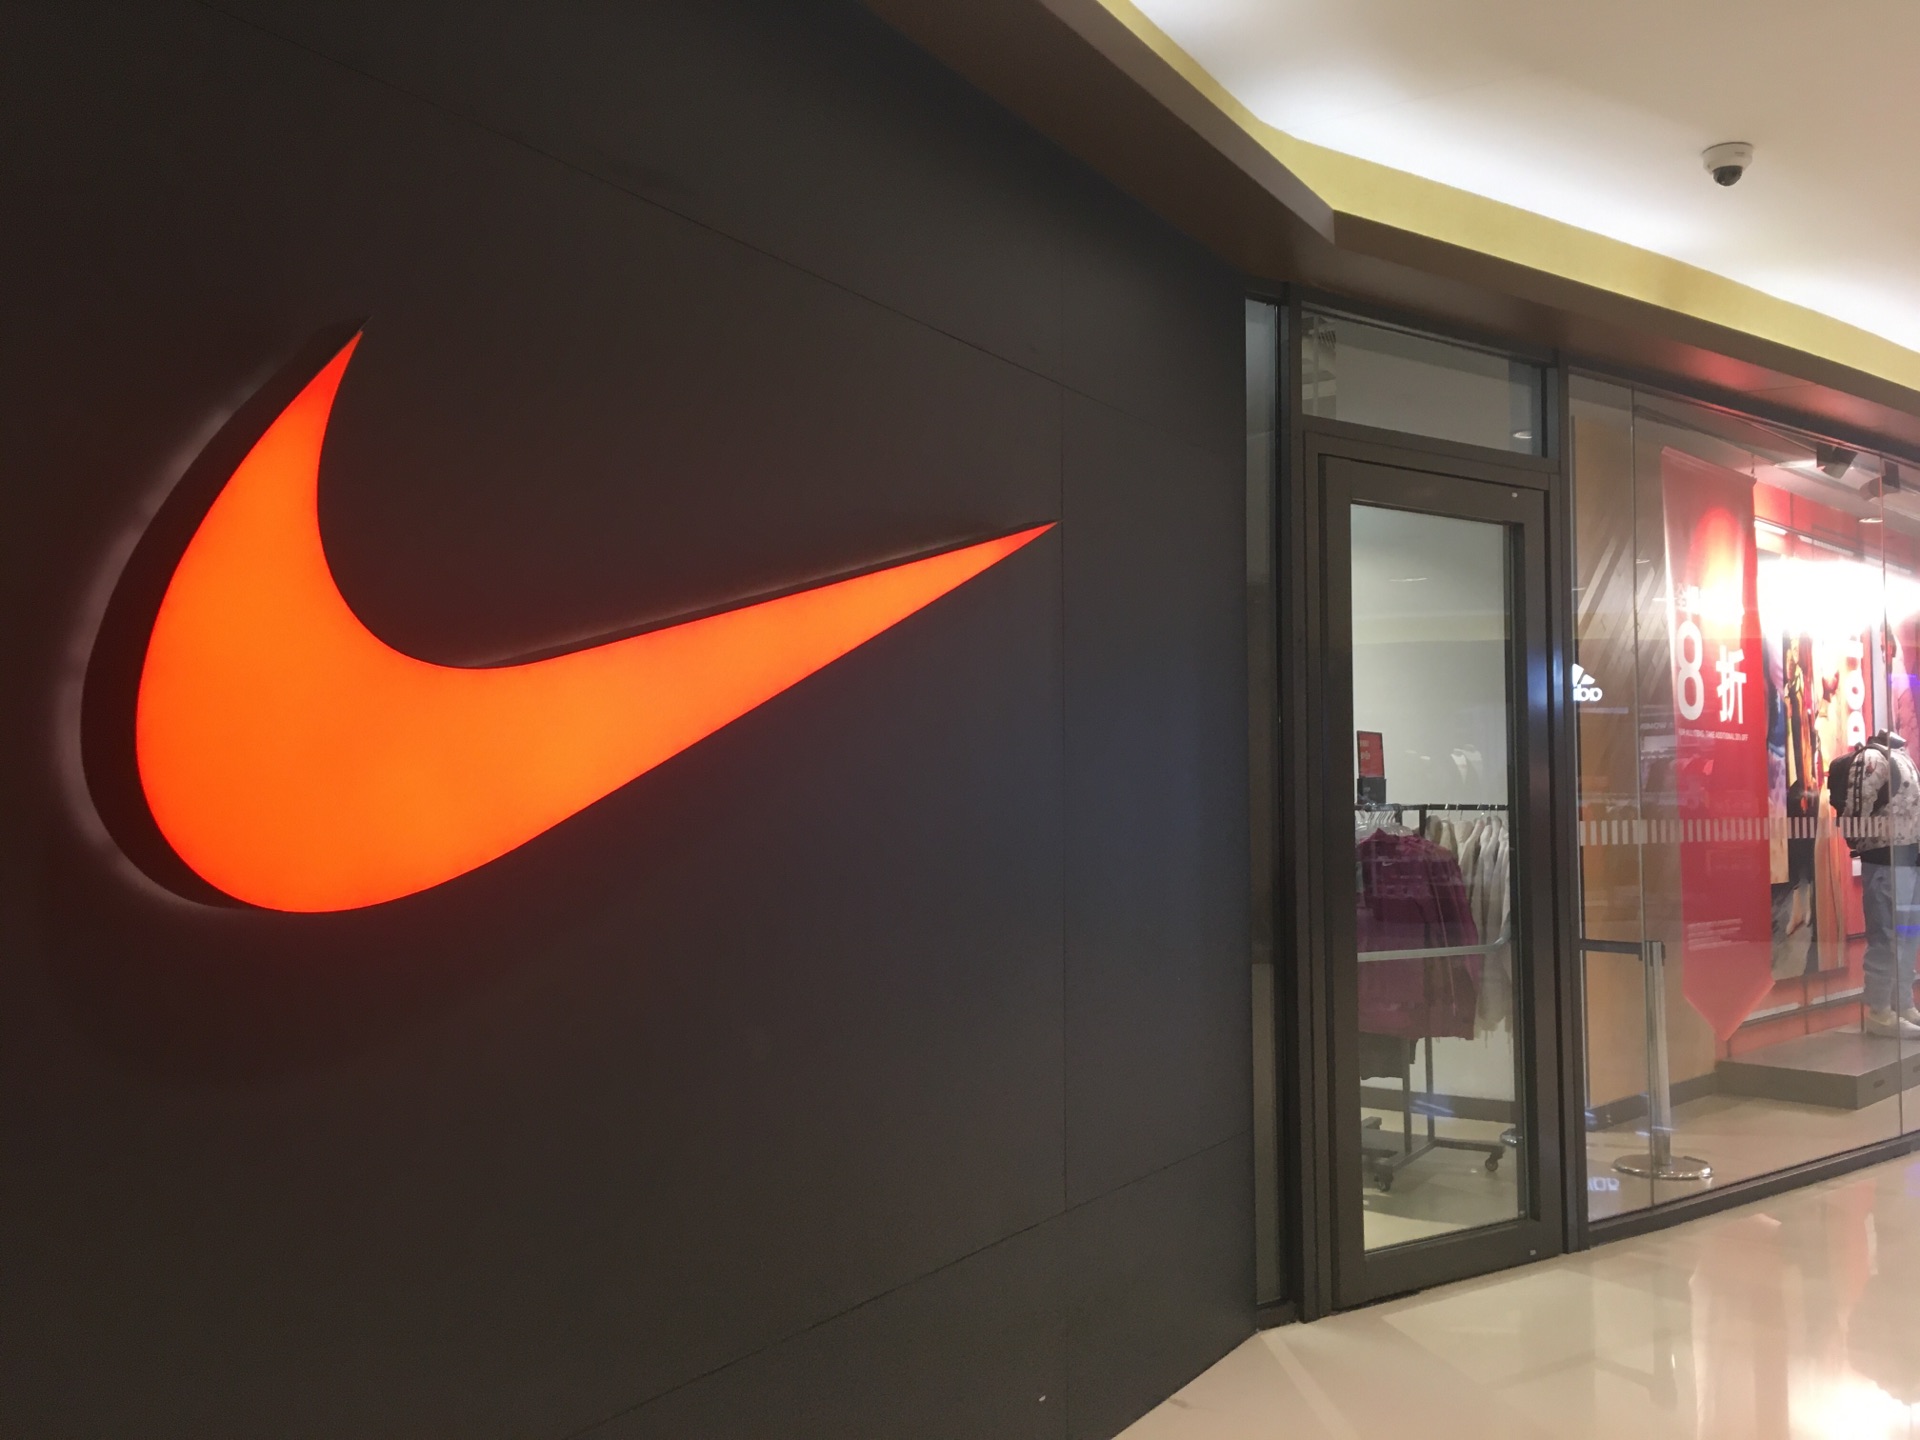 Shopping itineraries in Nike Factory Store in 2023-06-09T17:00:00-07:00  (updated in 2023-06-09T17:00:00-07:00) - Trip.com